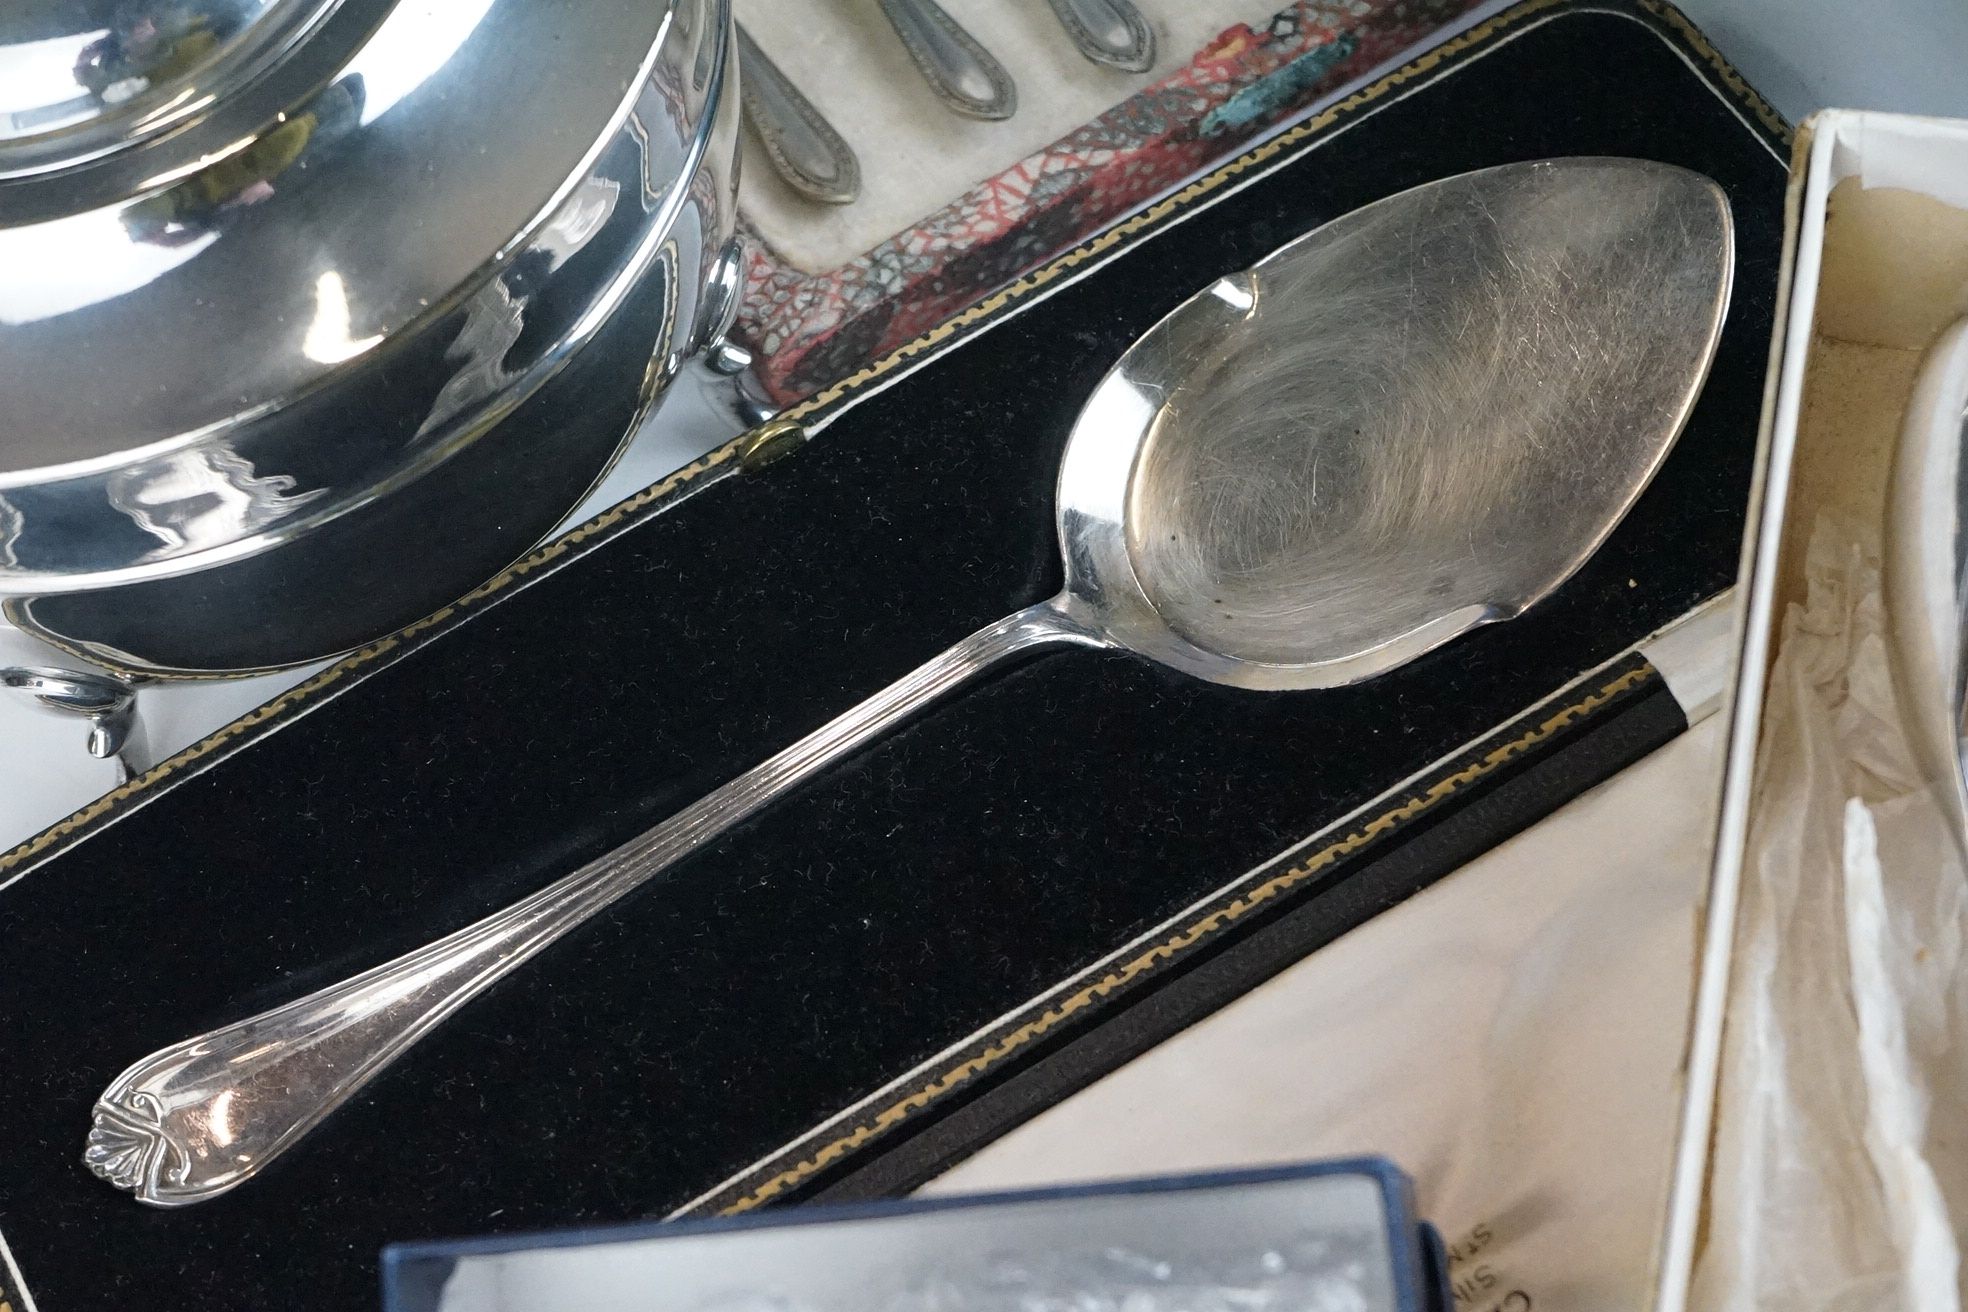 A box of mixed silver plate to include cased cutlery sets, teapot, cruet set, christening set...etc. - Image 5 of 10